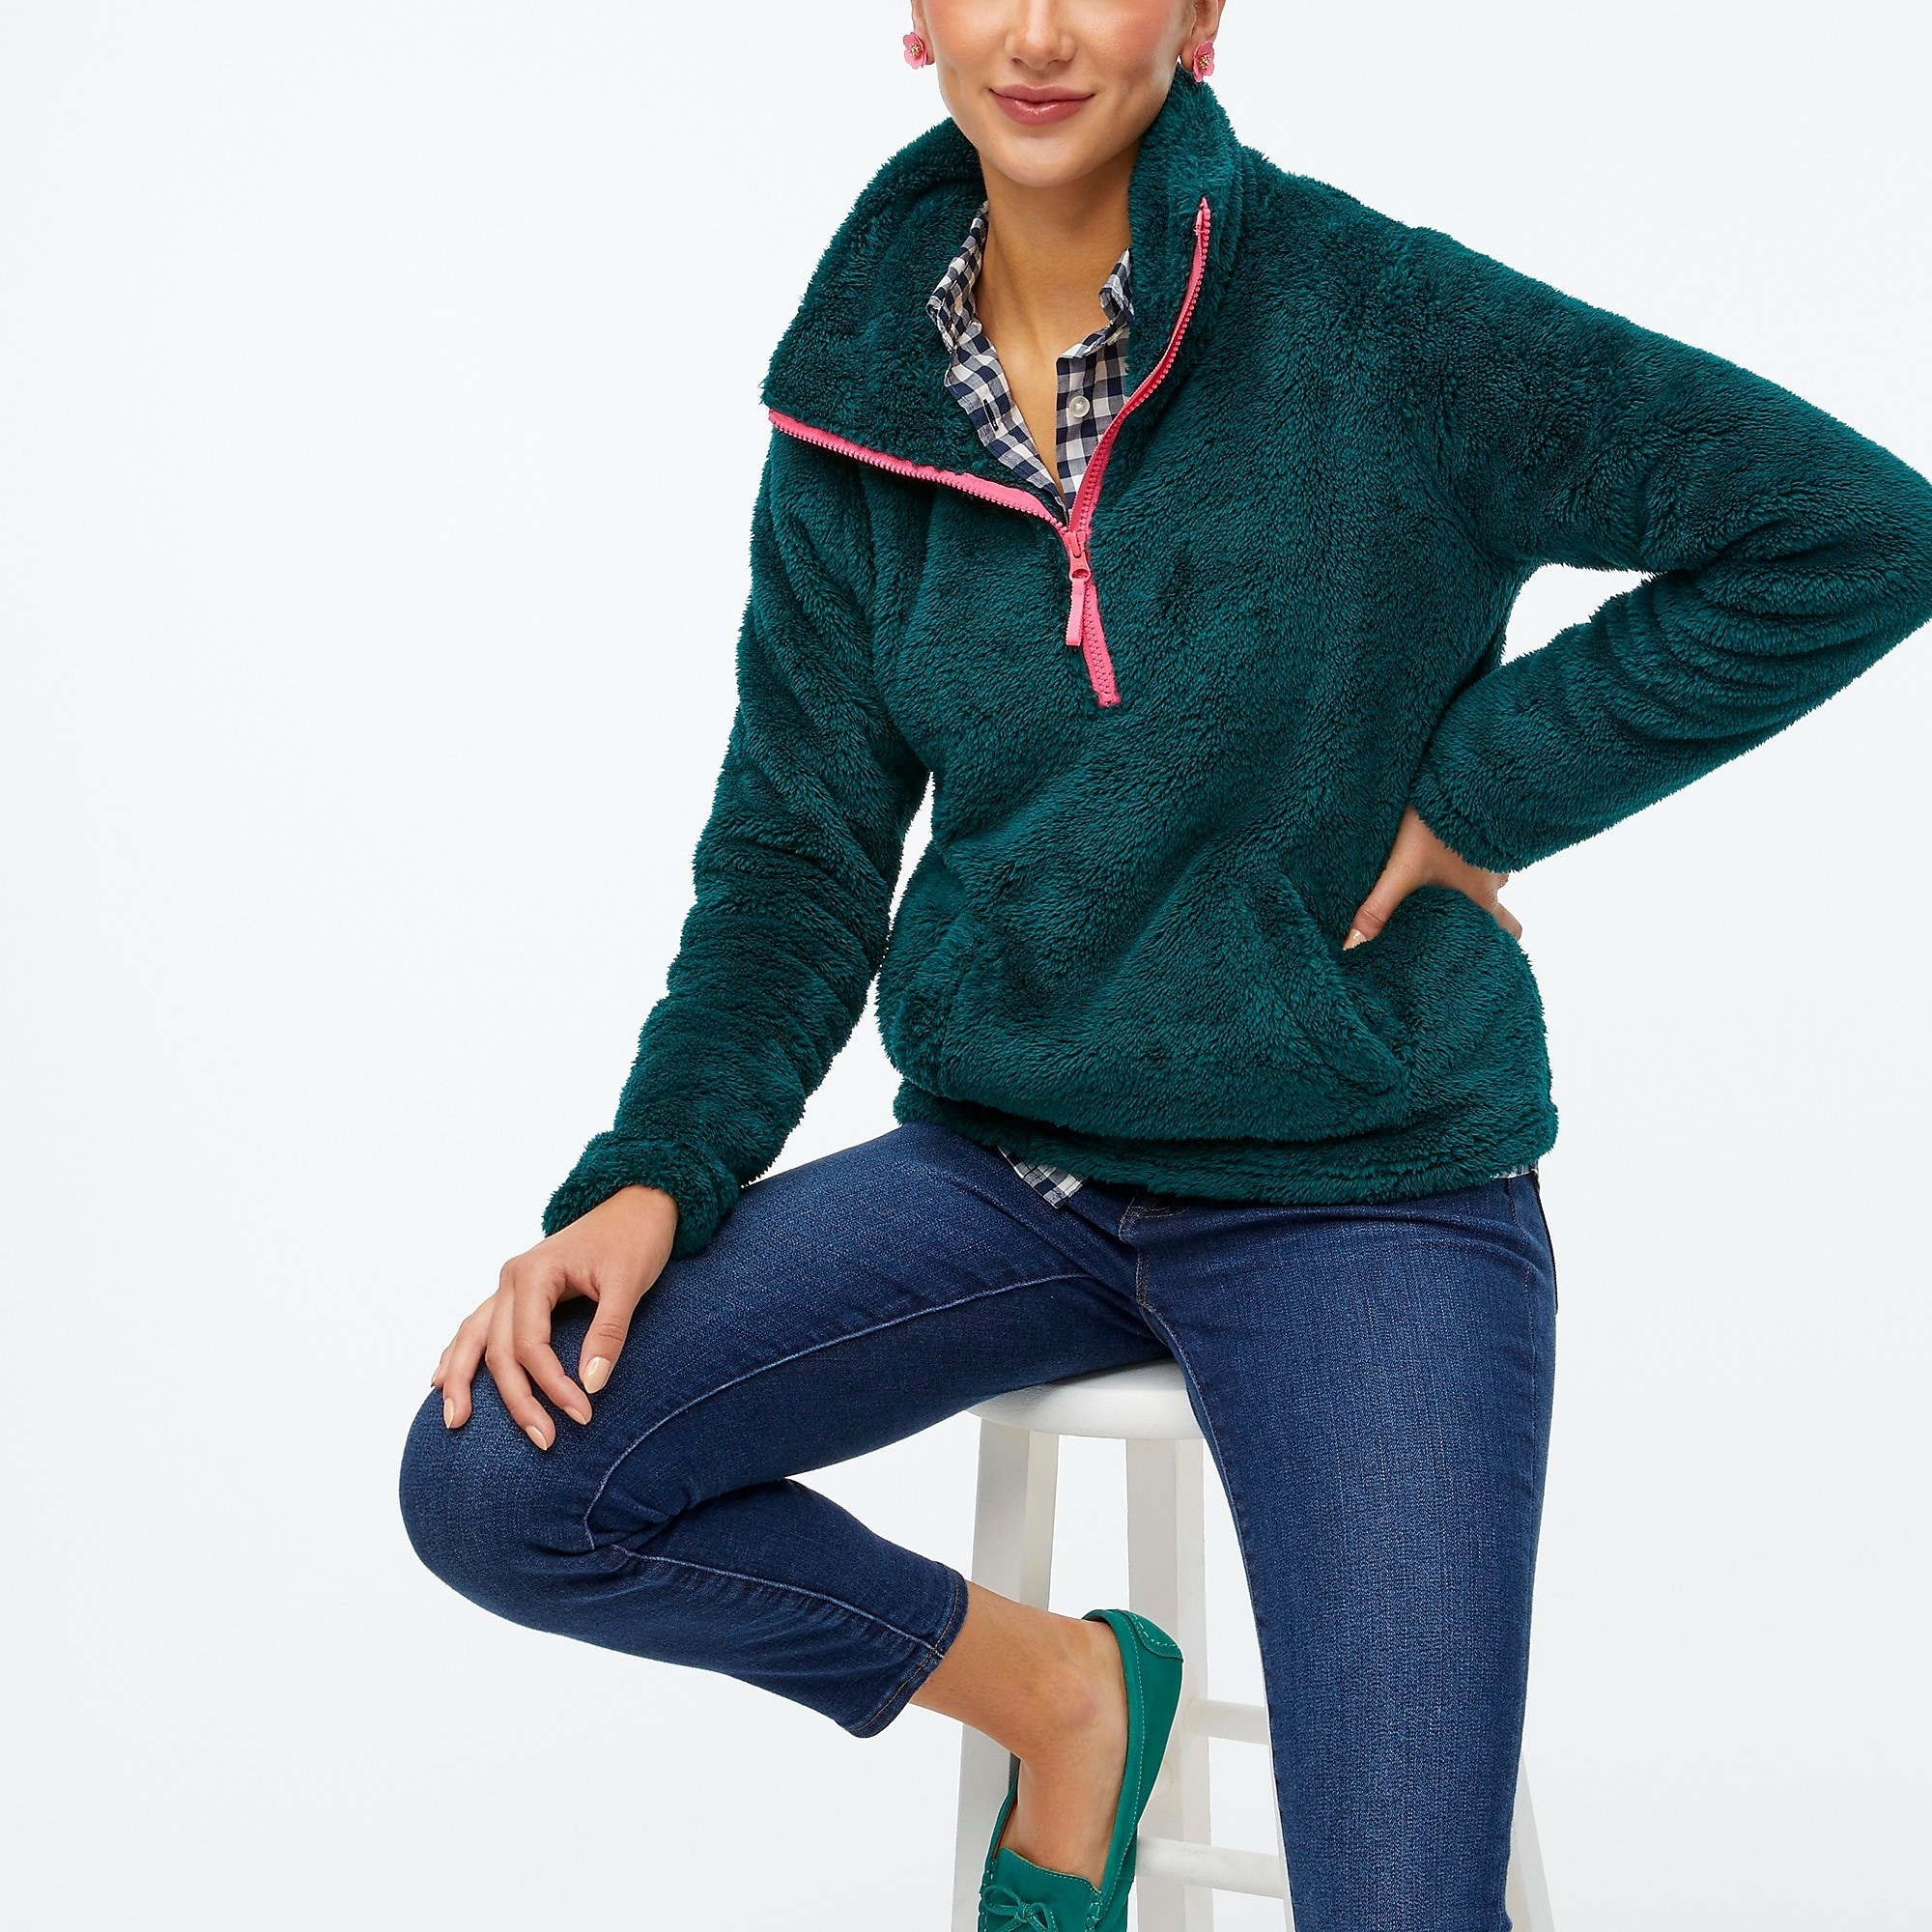 Model wearing a green half zip with jeans and blue and white top